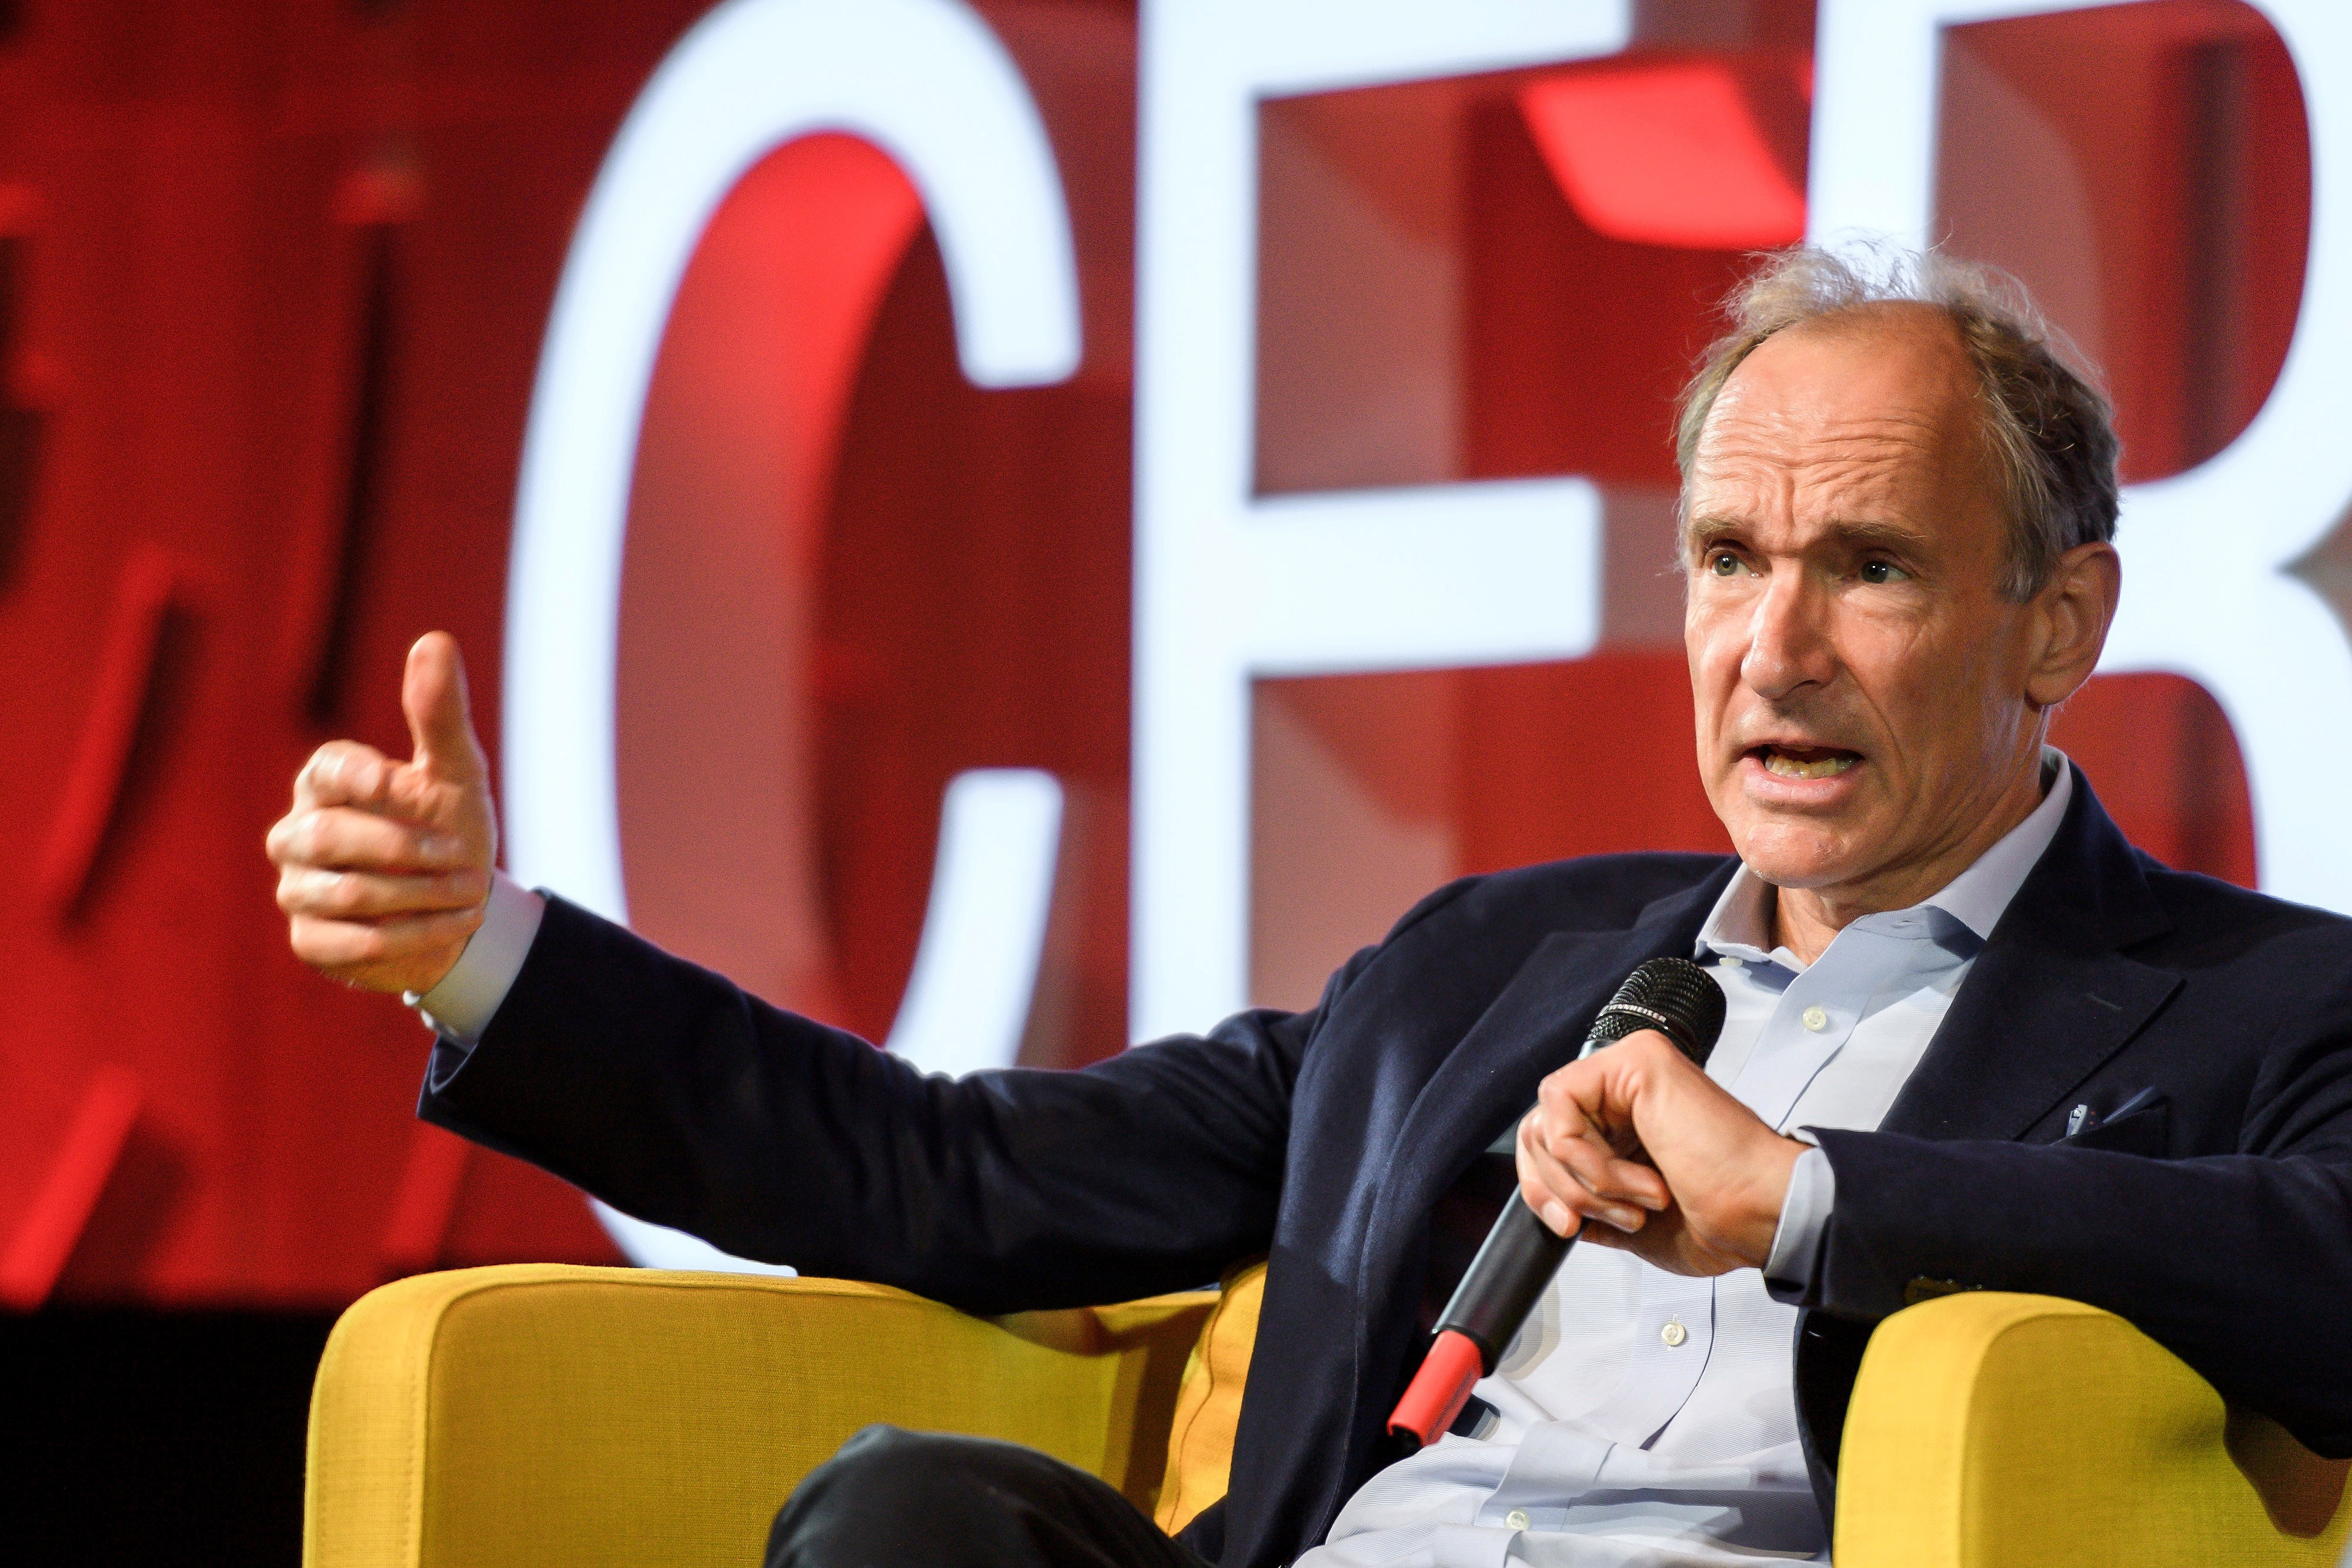 World Wide Web founder Sir Tim Berners-Lee calls for efforts to reduce fake news